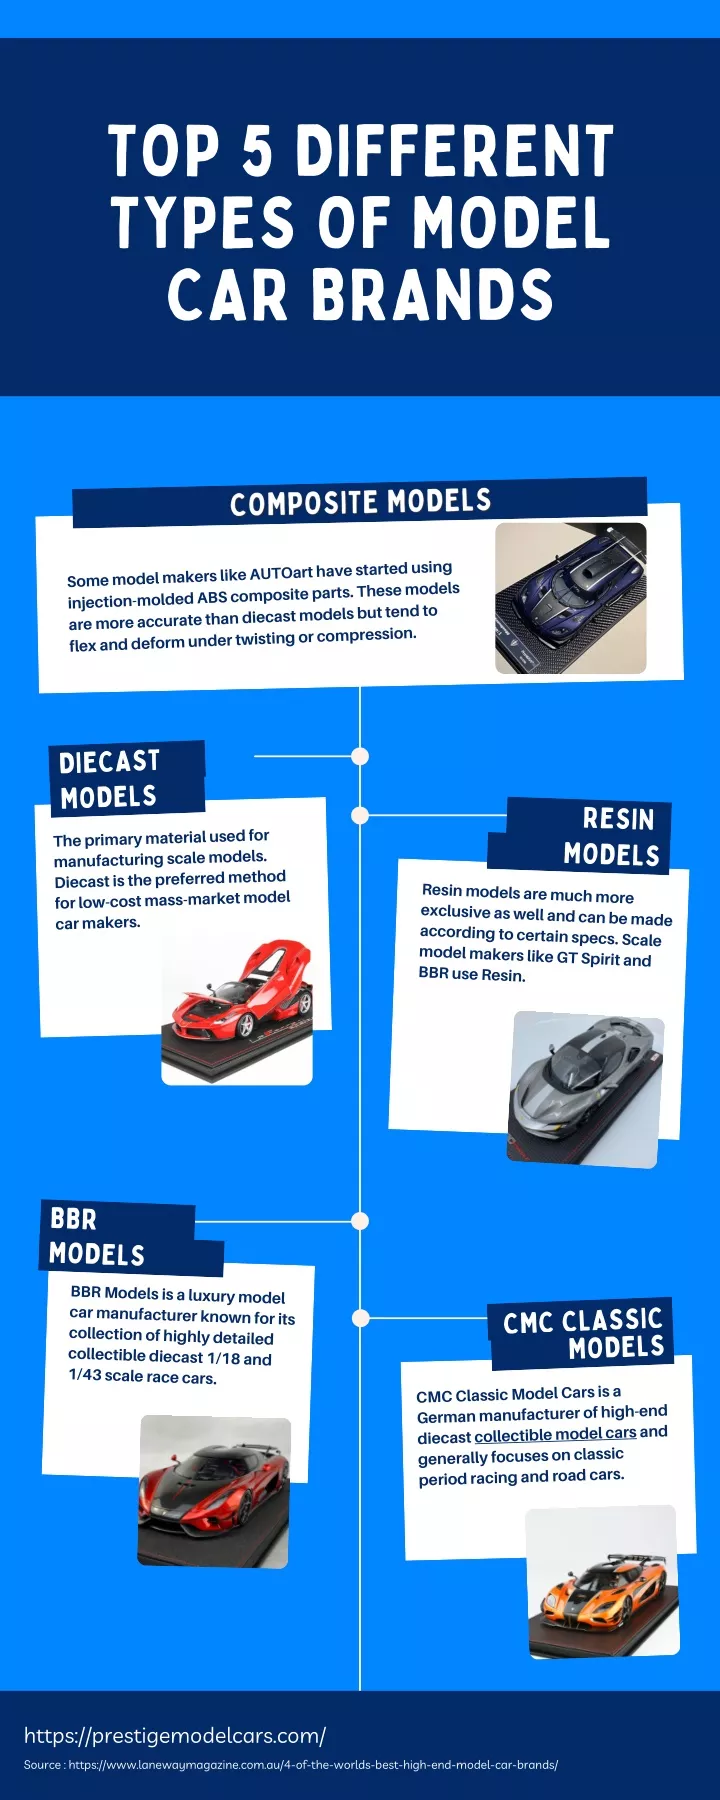 top 5 different types of model car brands